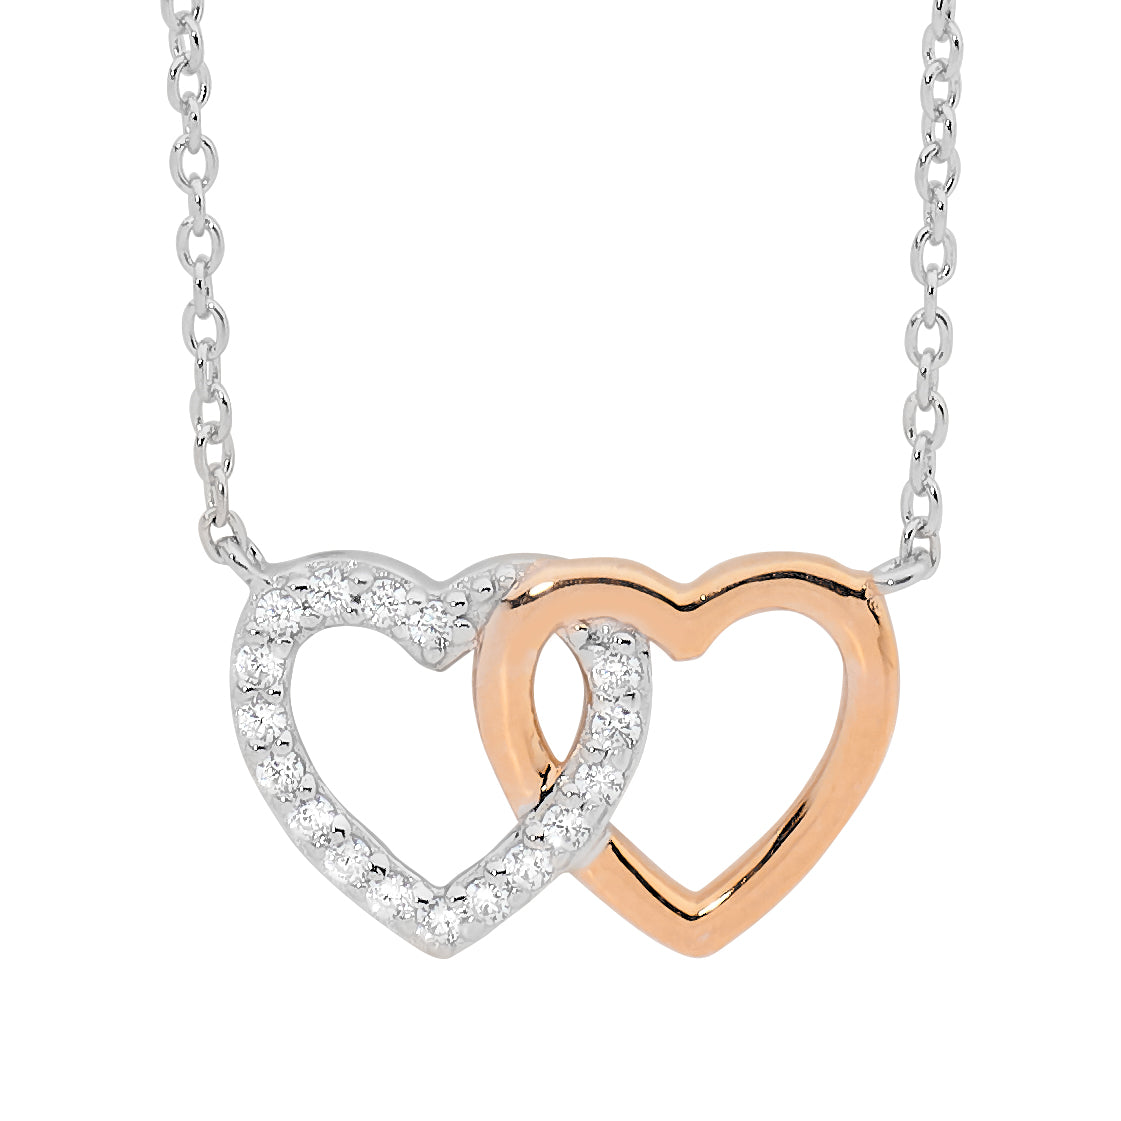 S/S Wh/Cz Double Link Heart Attached Chain With Rg Plated Heart